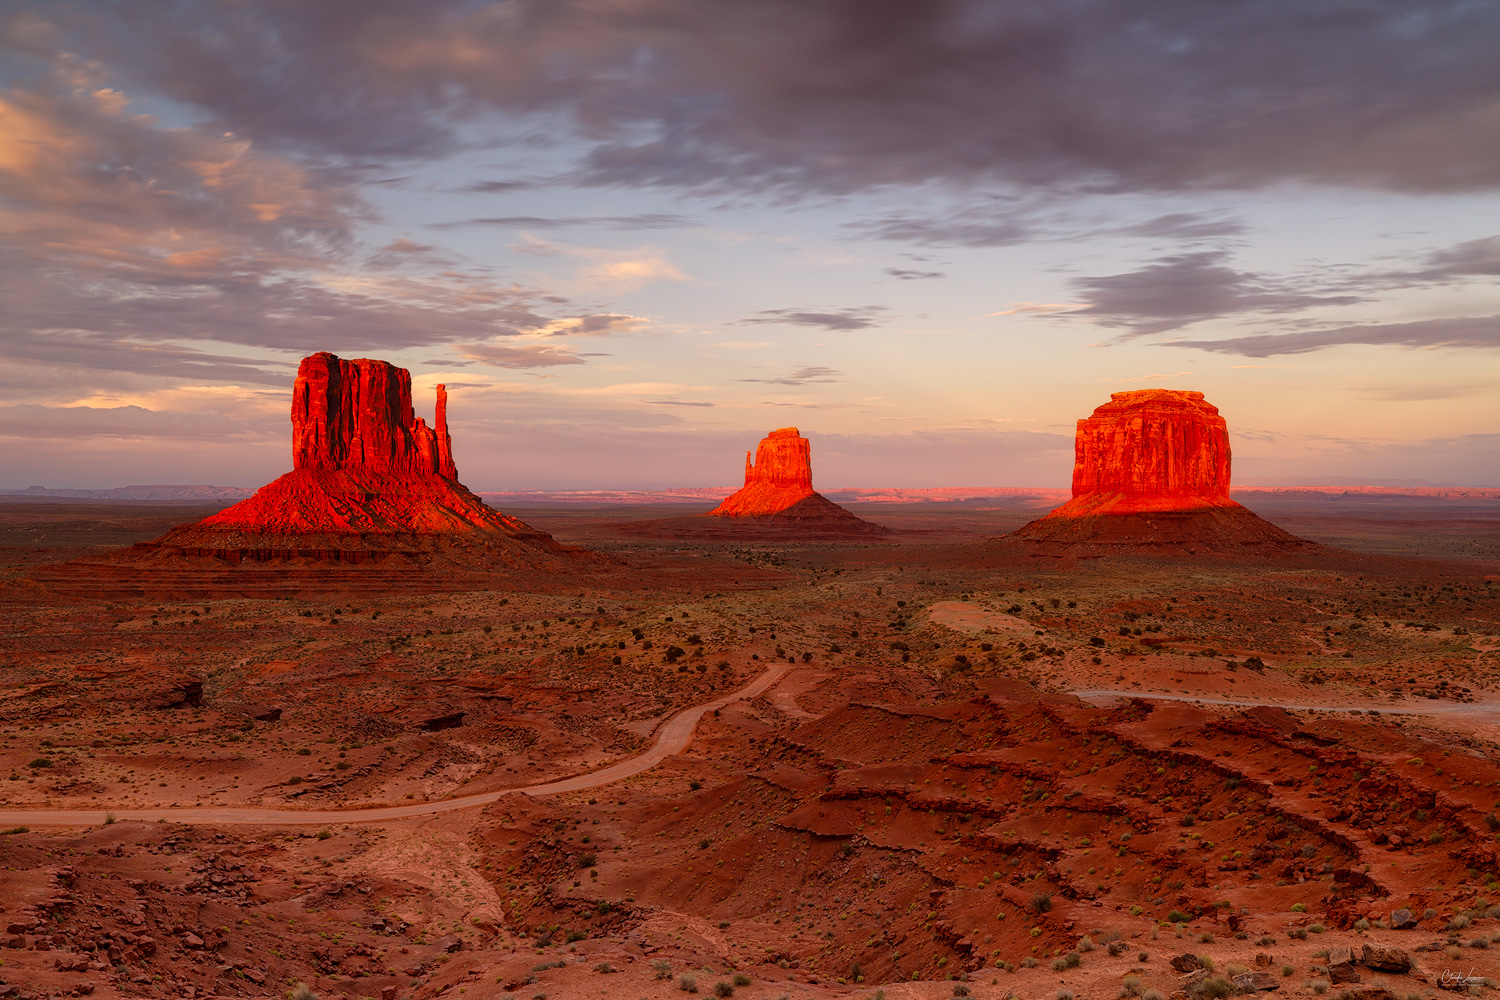 View of the sandstone towers at sunset in Monument Valley on the Arizona-Utah border.